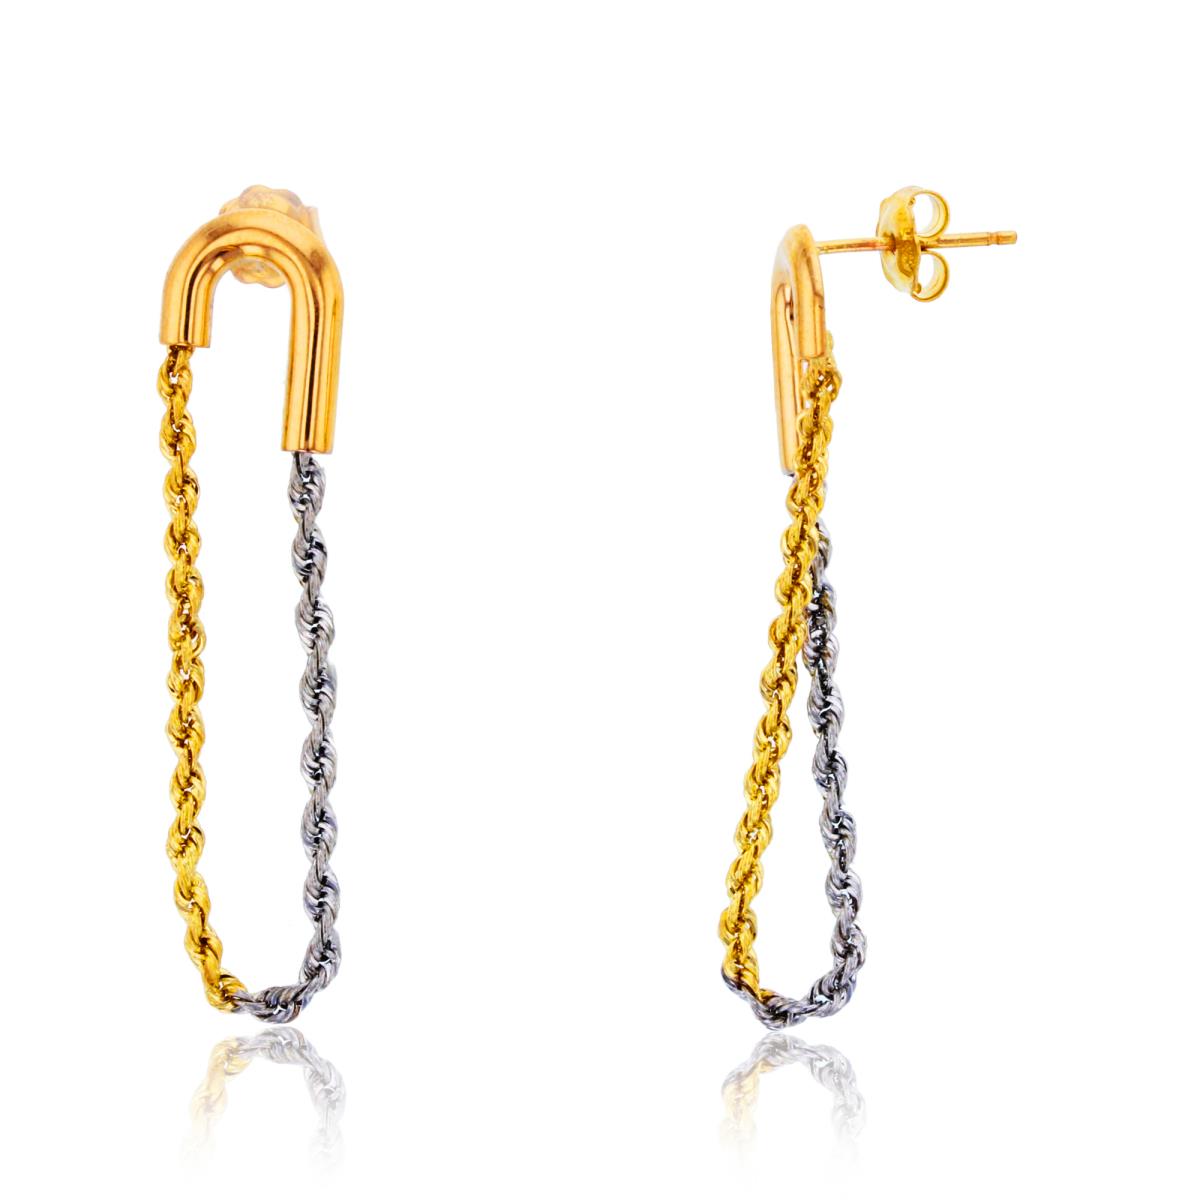 10K Two-Tone Gold DC Twisted Chain on Horseshoe Dangling Earring